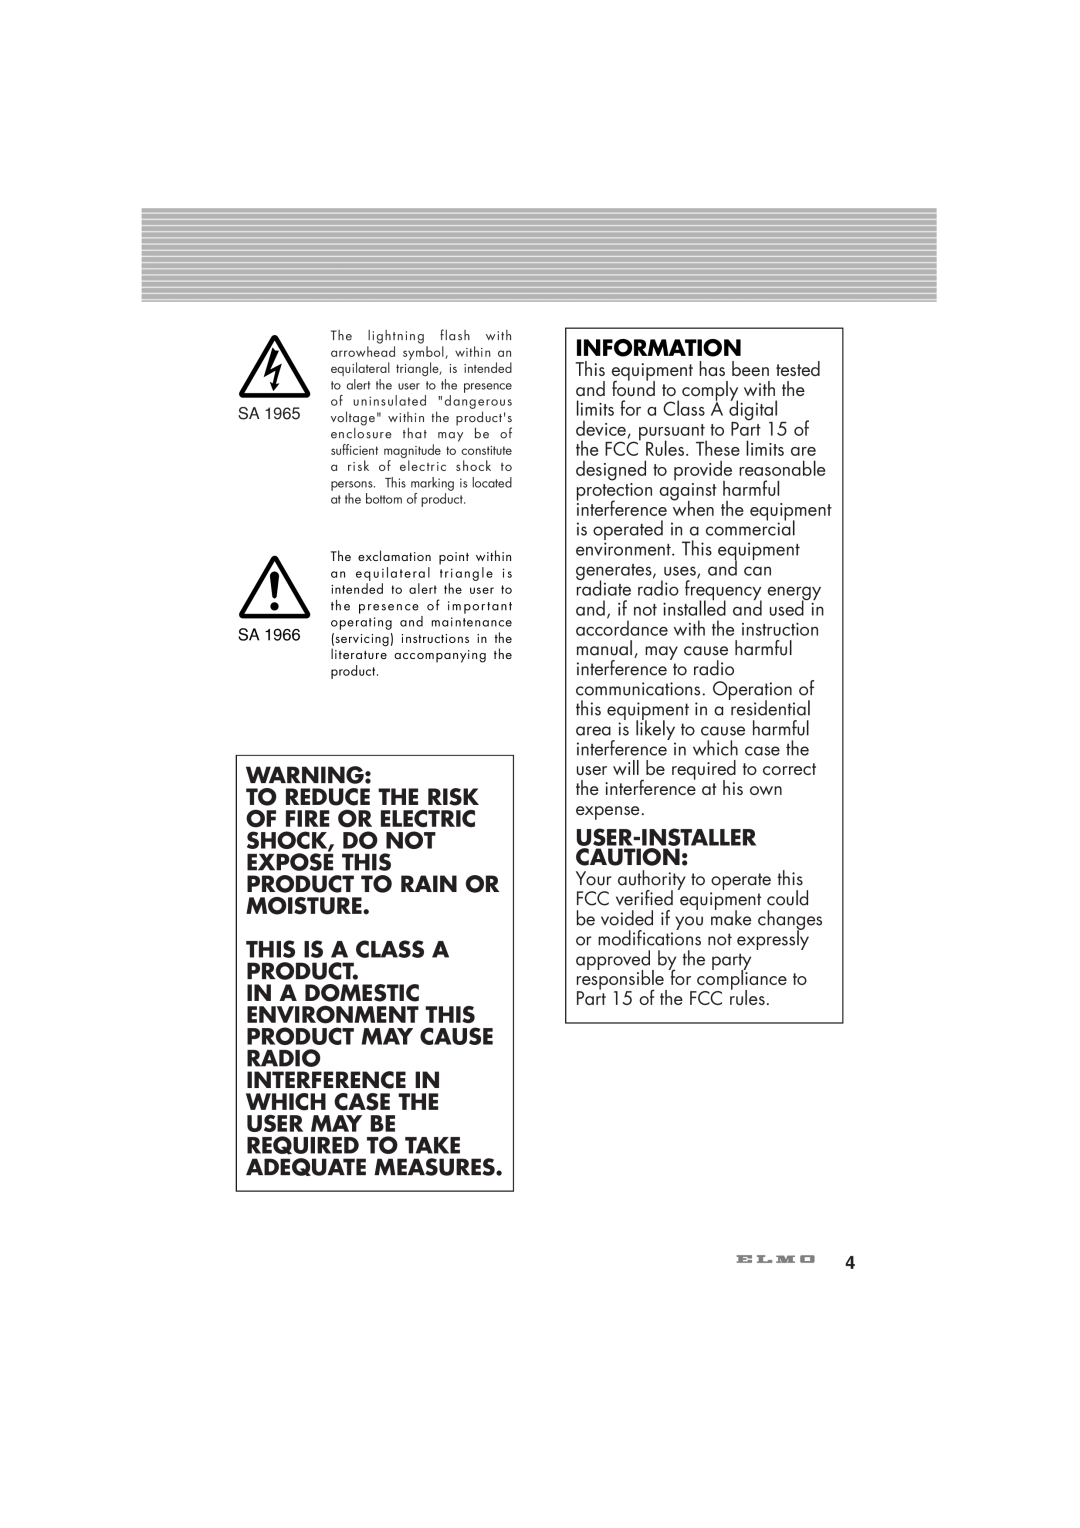 Elmo HV-7100SX instruction manual This Is A Class A Product, Information, User-Installer 